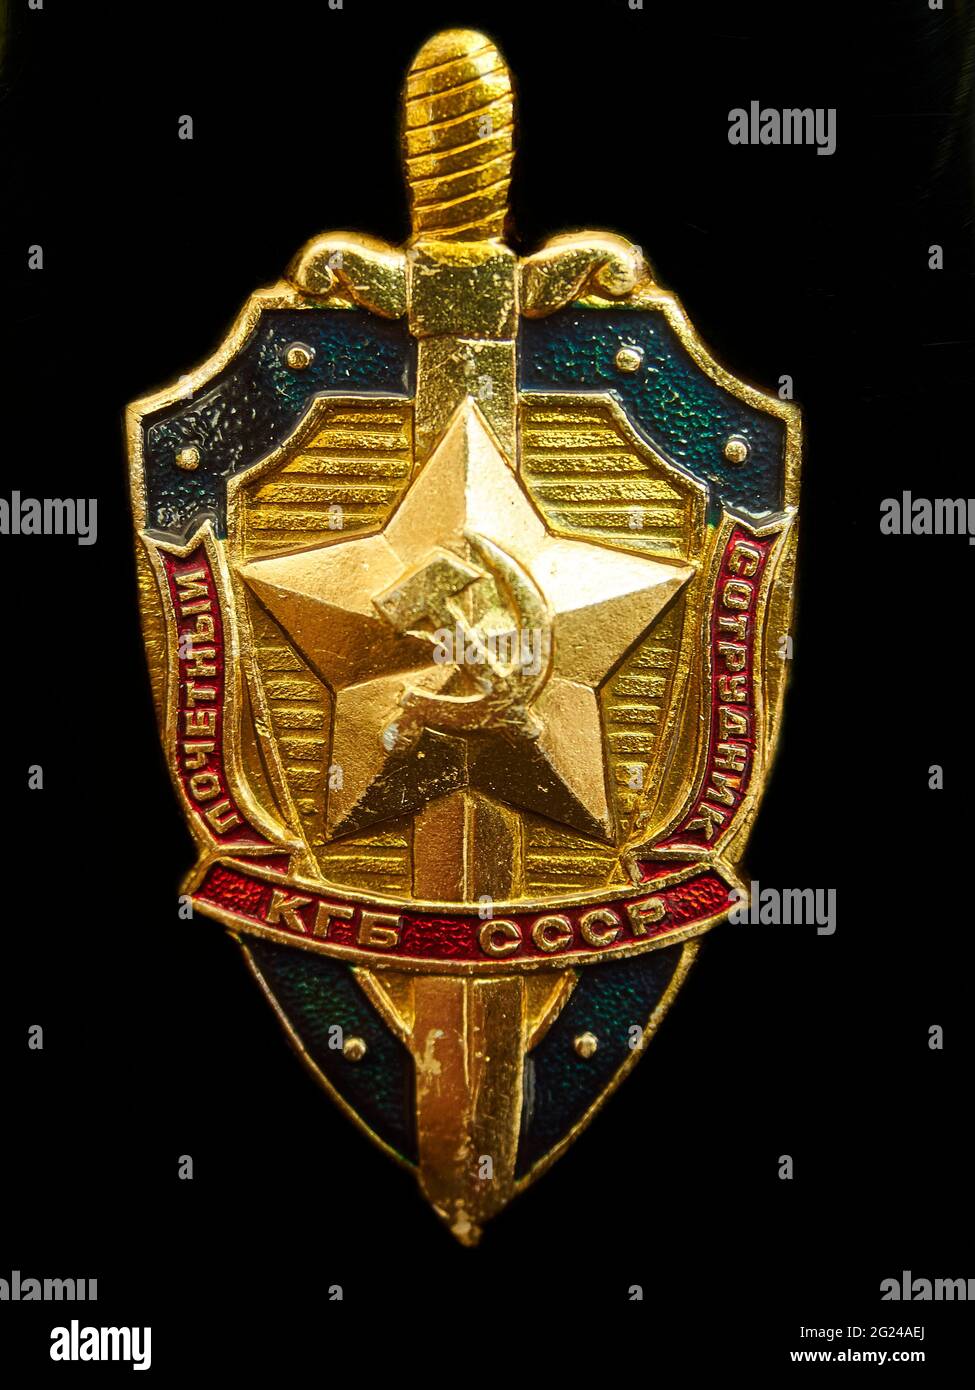 Pictorial, representative image of the badge / insignia of the KGB security agency, attached to a metal flask (photographer’s own) - black background. Stock Photo